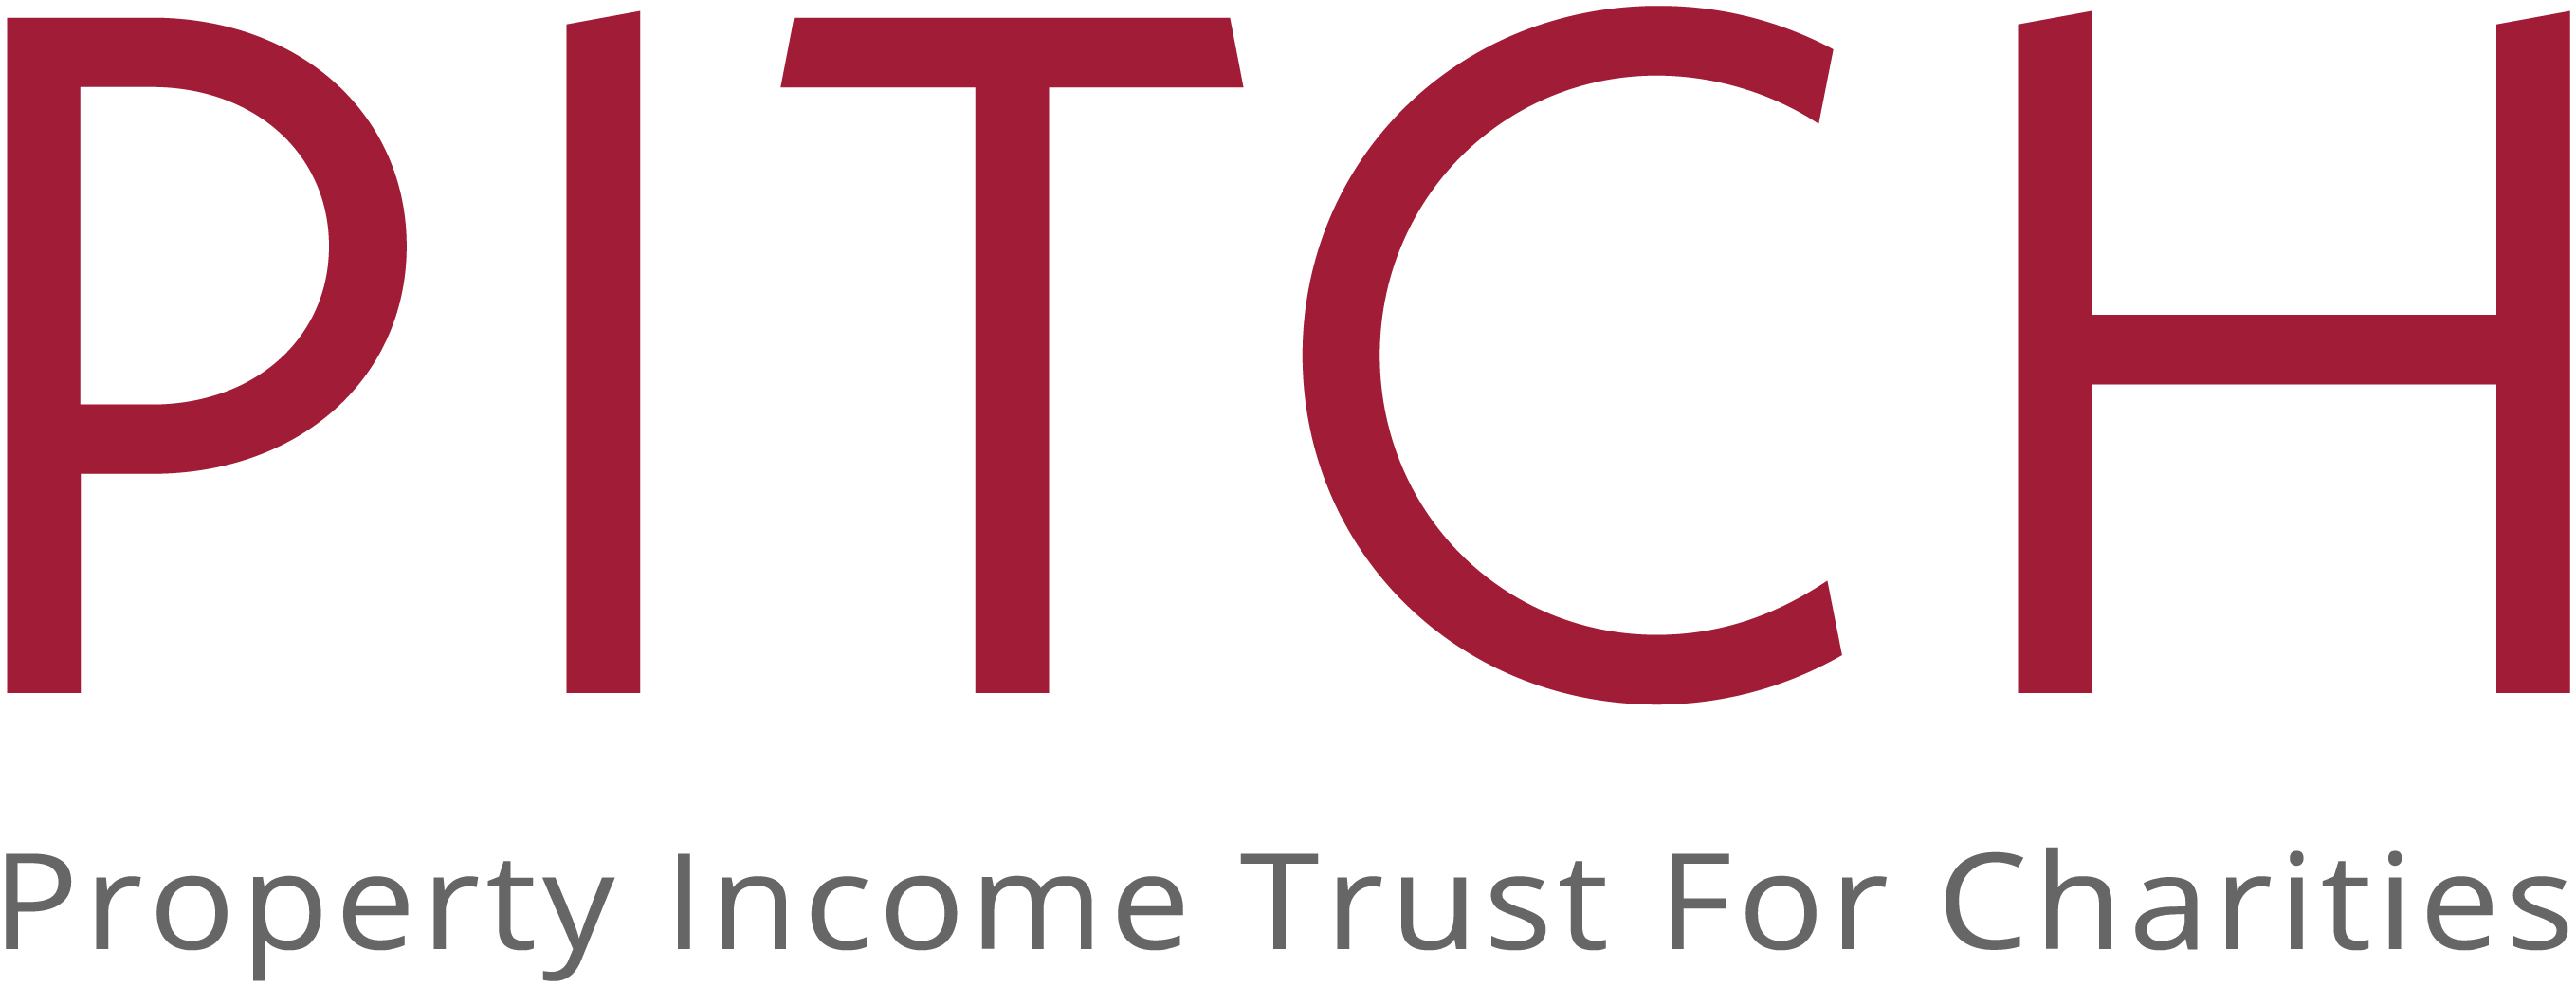 logo for Property Income Trust for Charities (PITCH)